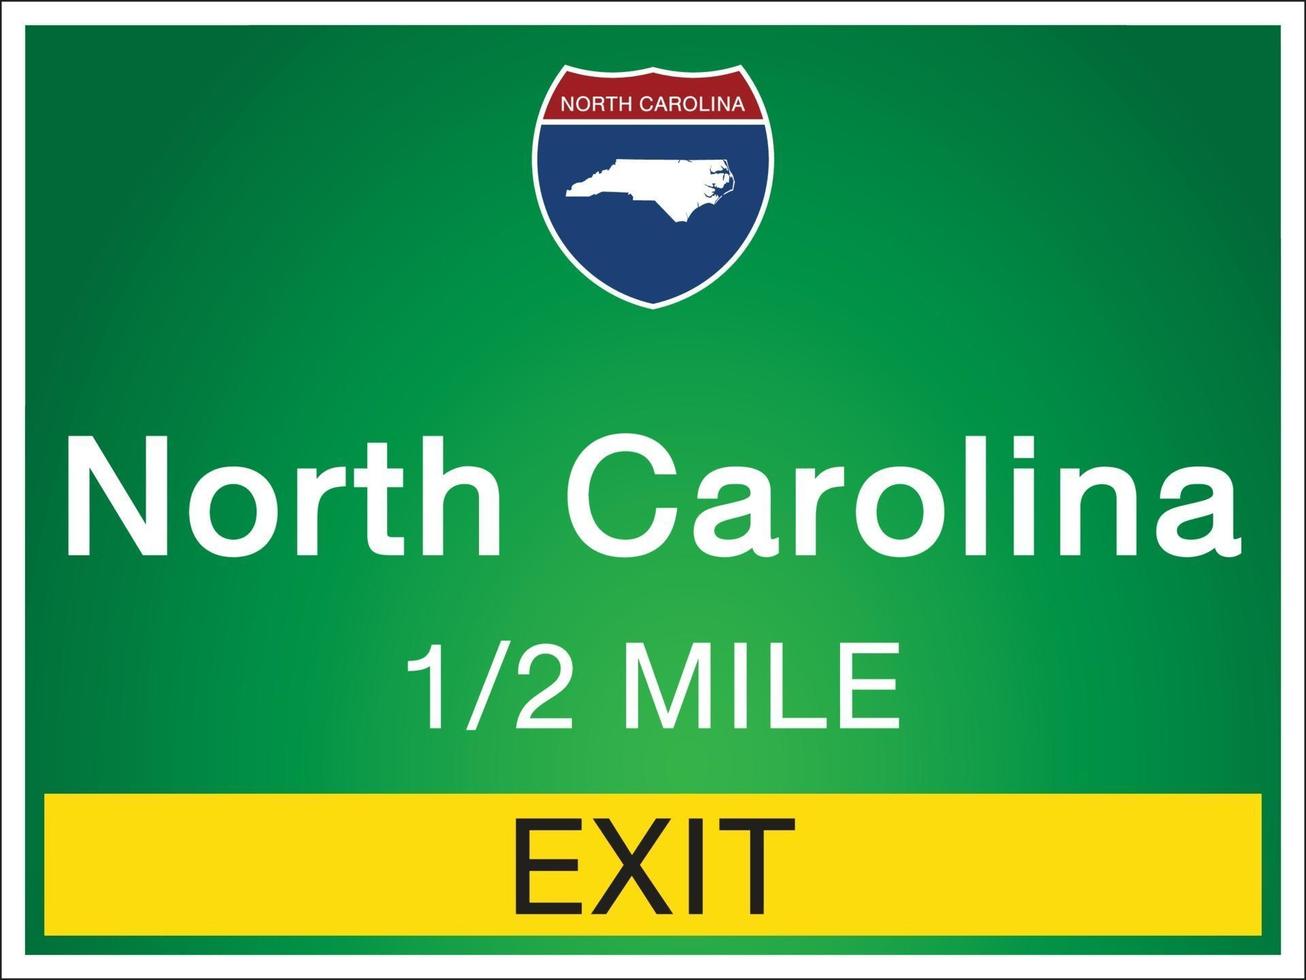 Signage on the highway in North Carolina vector